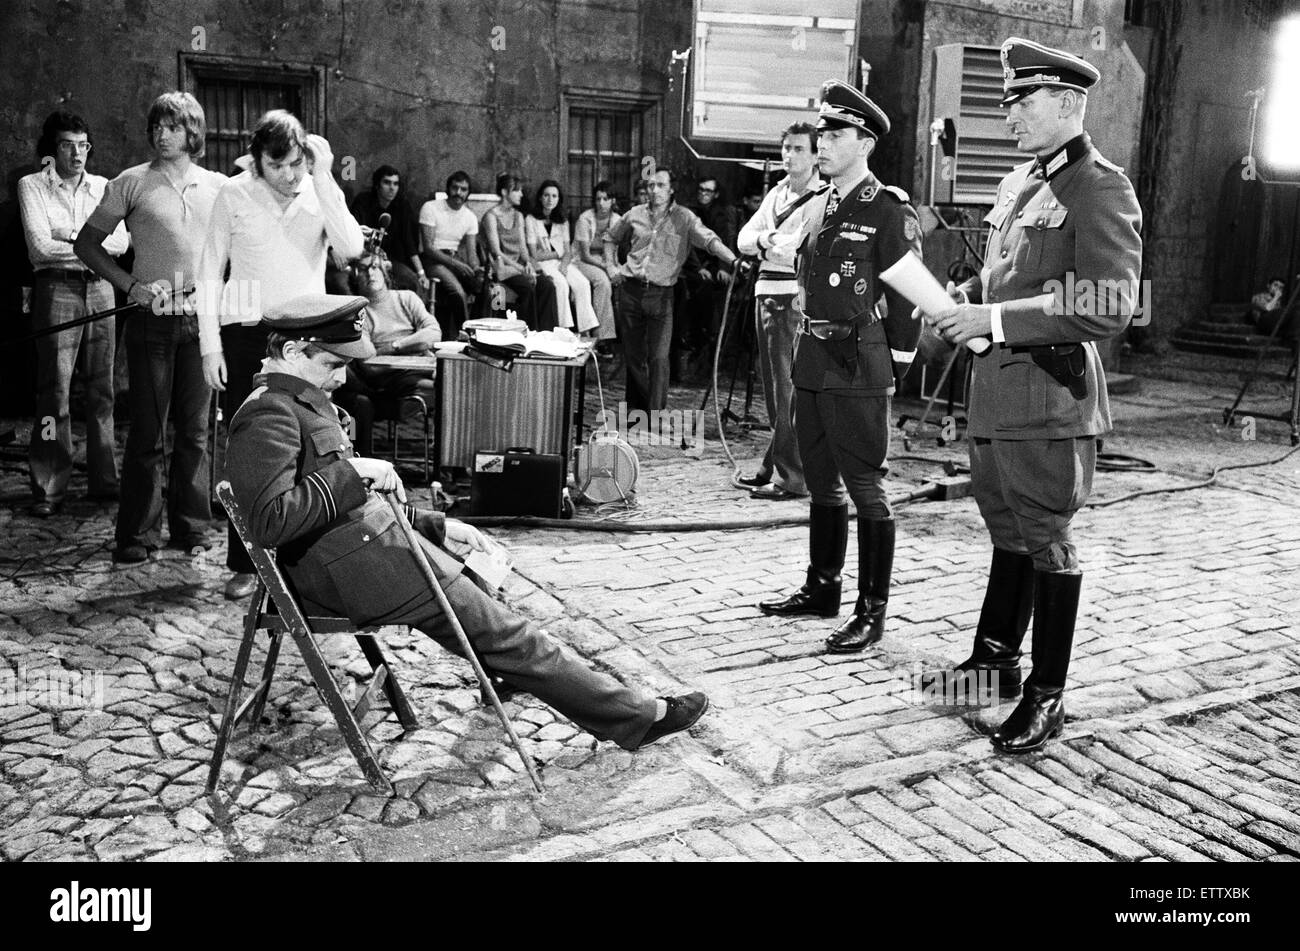 Actor David McCallum (seated) on the film set during filming of 'Colditz', the BBC TV series. He played the part of Flight Lieutenant Simon Carter. Ealing Studios, London, 7th September 1973. Stock Photo